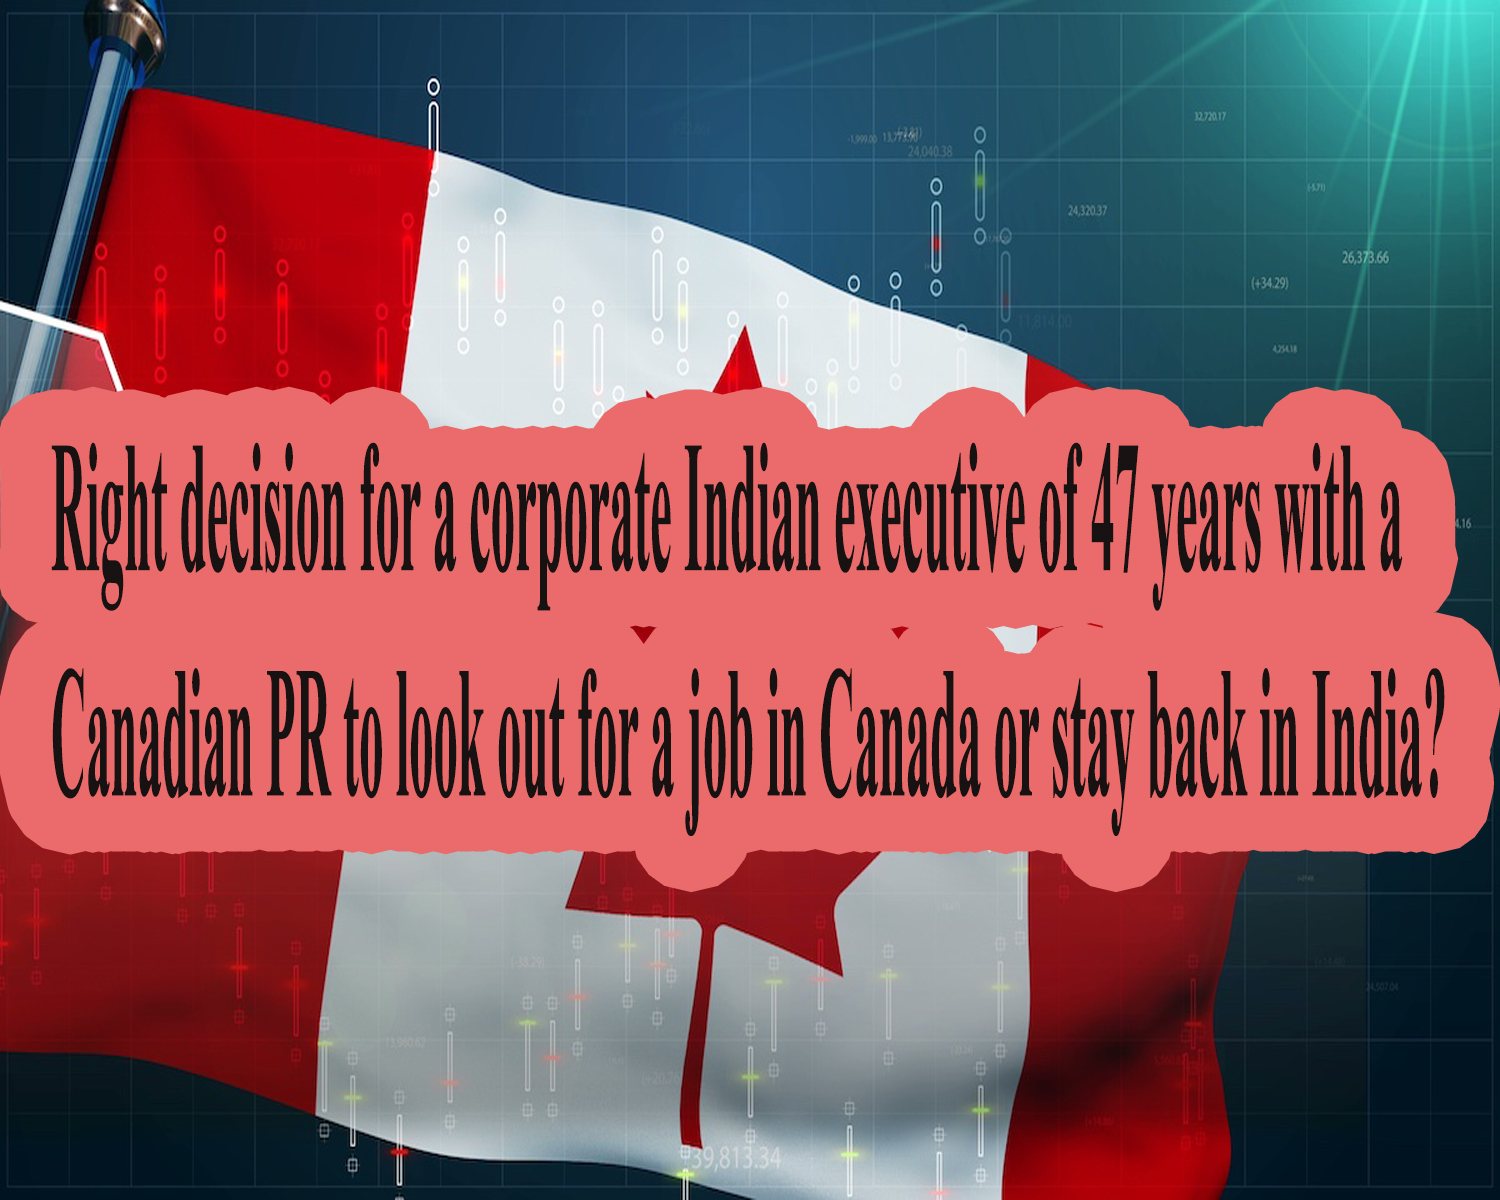 right decision for a corporate Indian executive of 47 years with a Canadian PR to look out for a job in Canada or stay back in India?